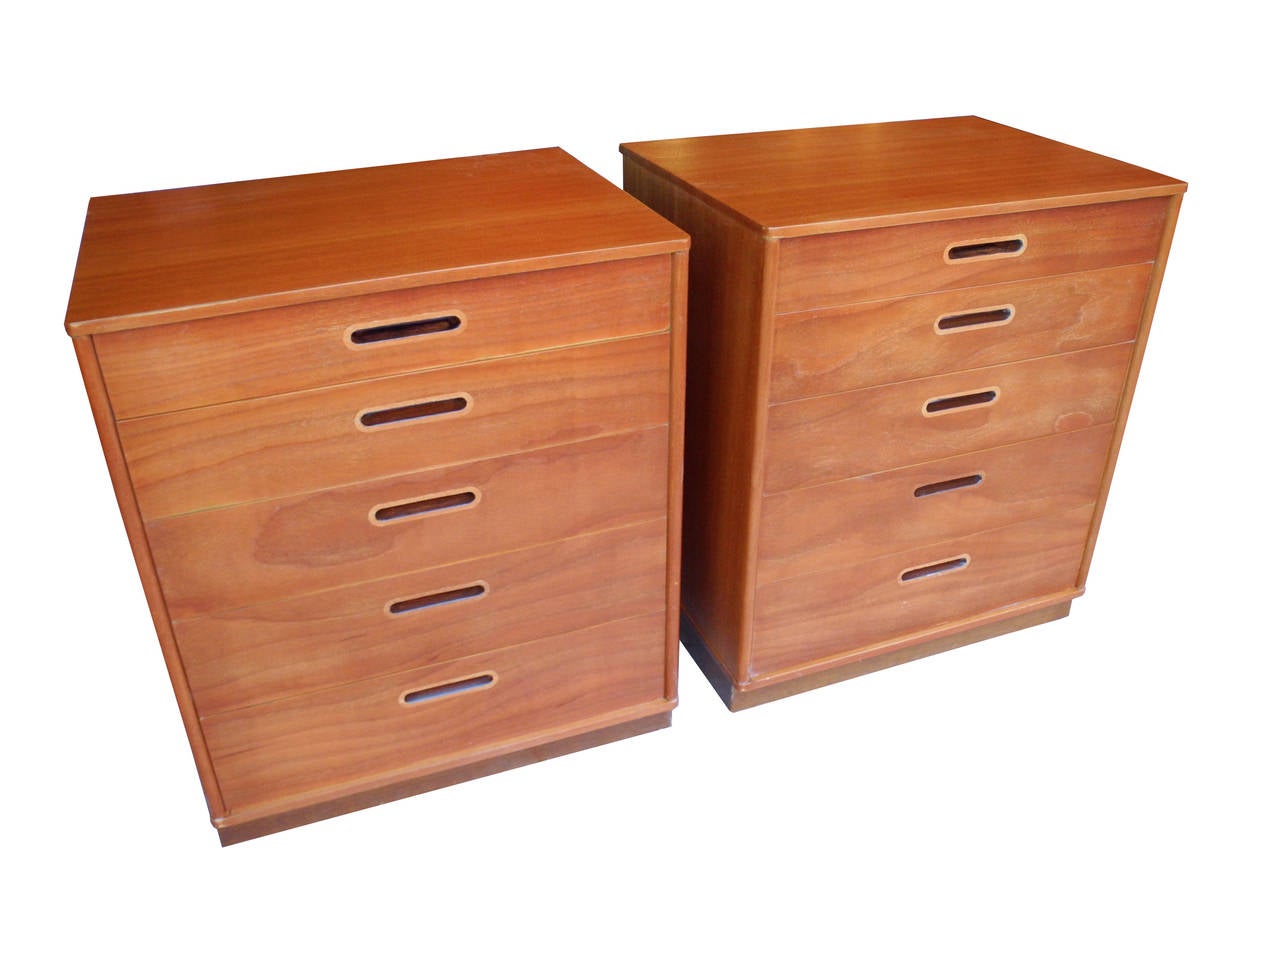 These six-drawer dressers or nightstands are made of mahogany.
The light warm stain shows off the grain of the wood. The detail of the inset handles which are inlaid with a lighter wood are also stained darker in the interior of the slot. The